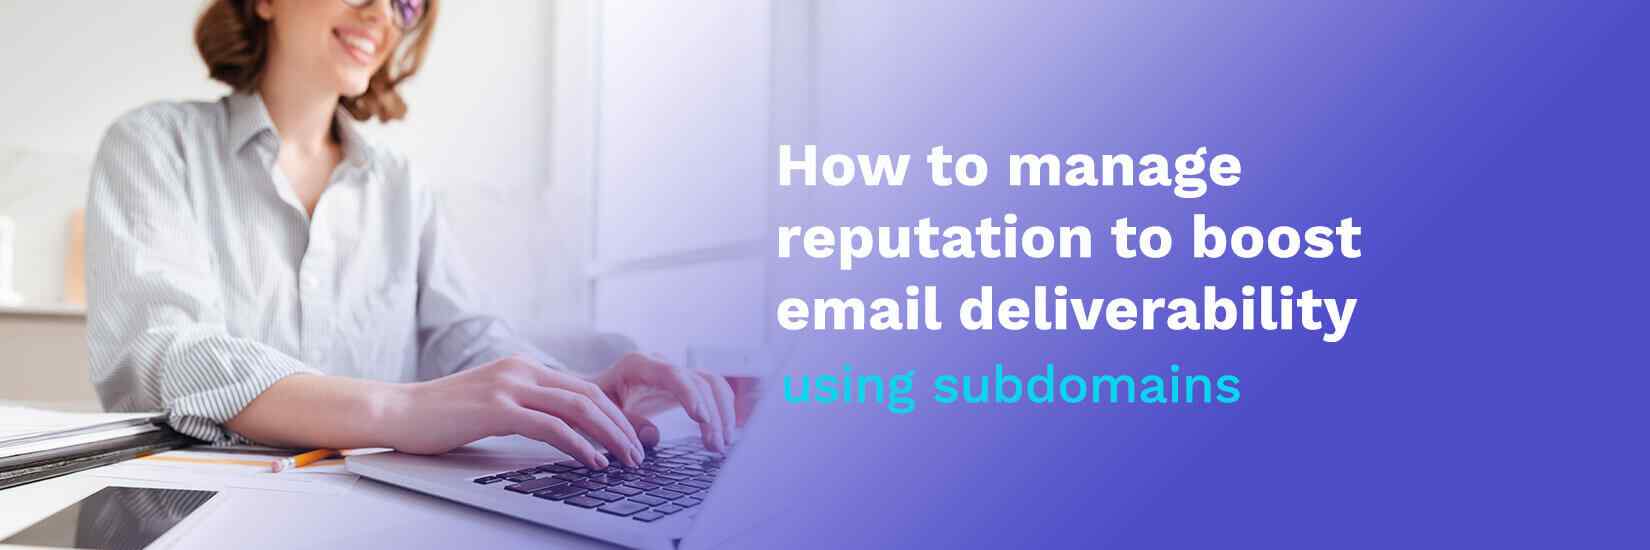 How to manage reputation to boost email deliverability using subdomains